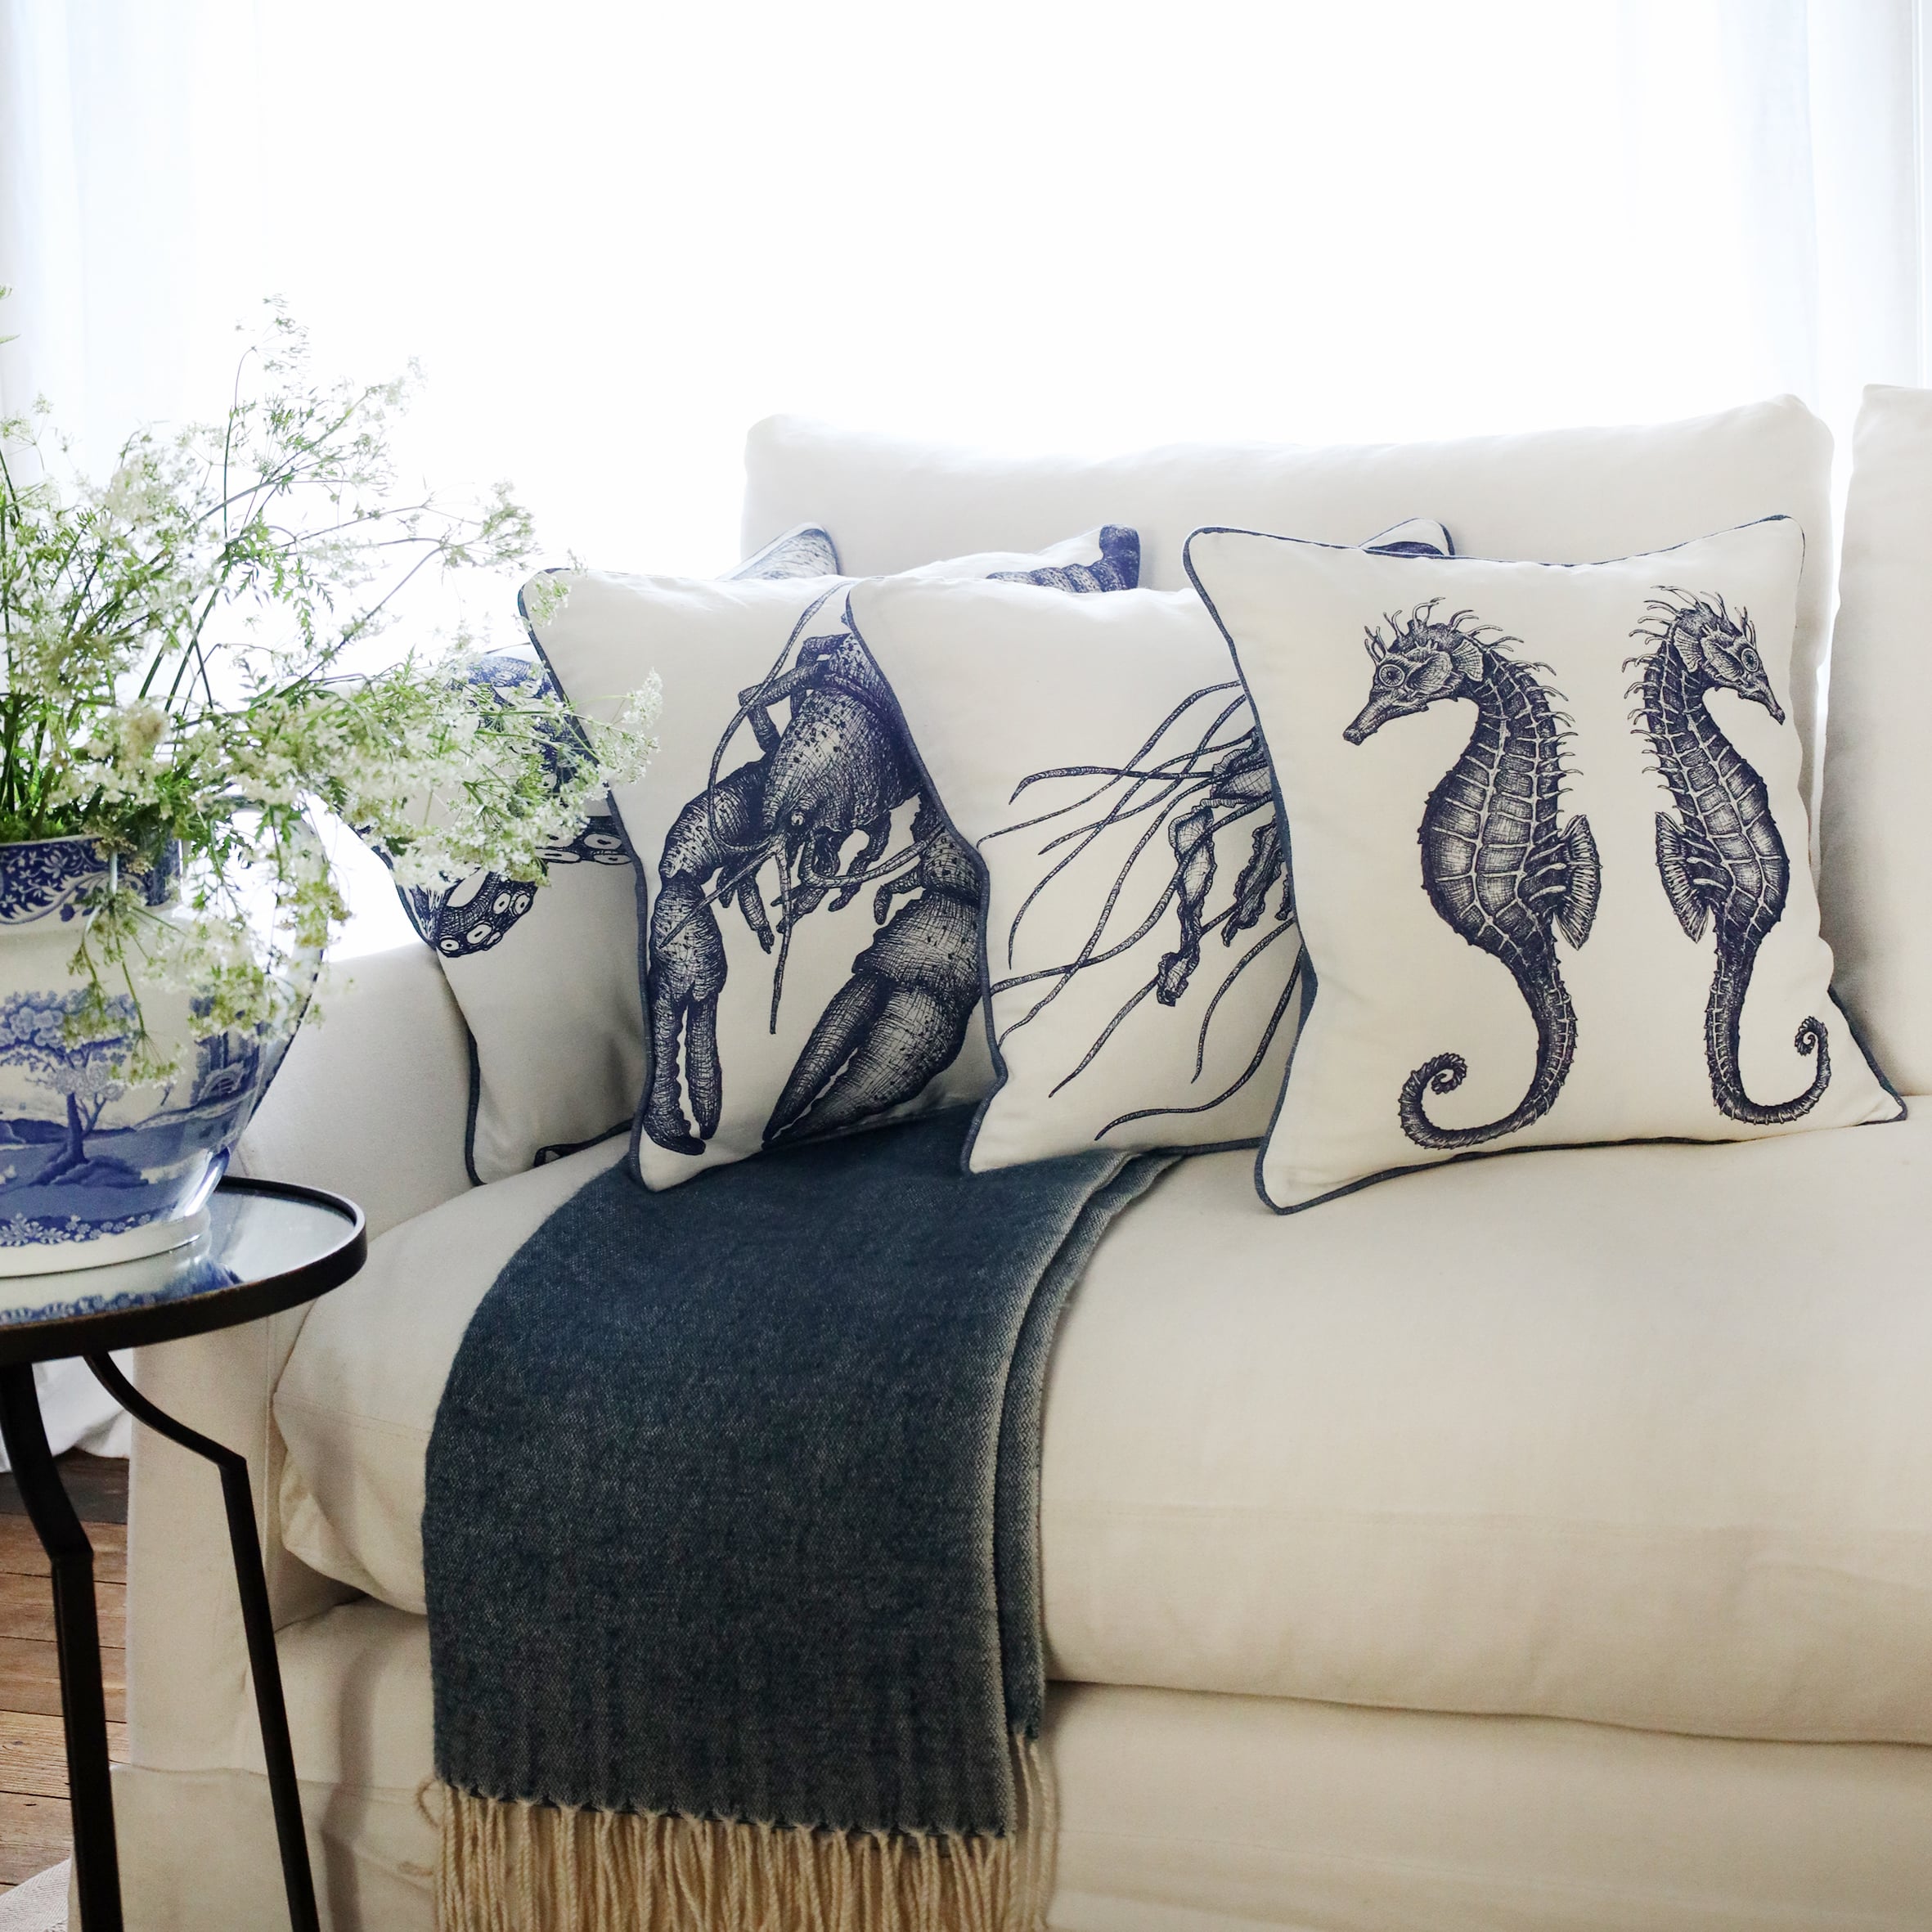 row of 4 blue & white illustrated sea creature cushions with a seahorse cushion at the front, sitting on a navy throw on a white sofa with bright sunlight window behind and a large willow pattern jug filled with cow parsley